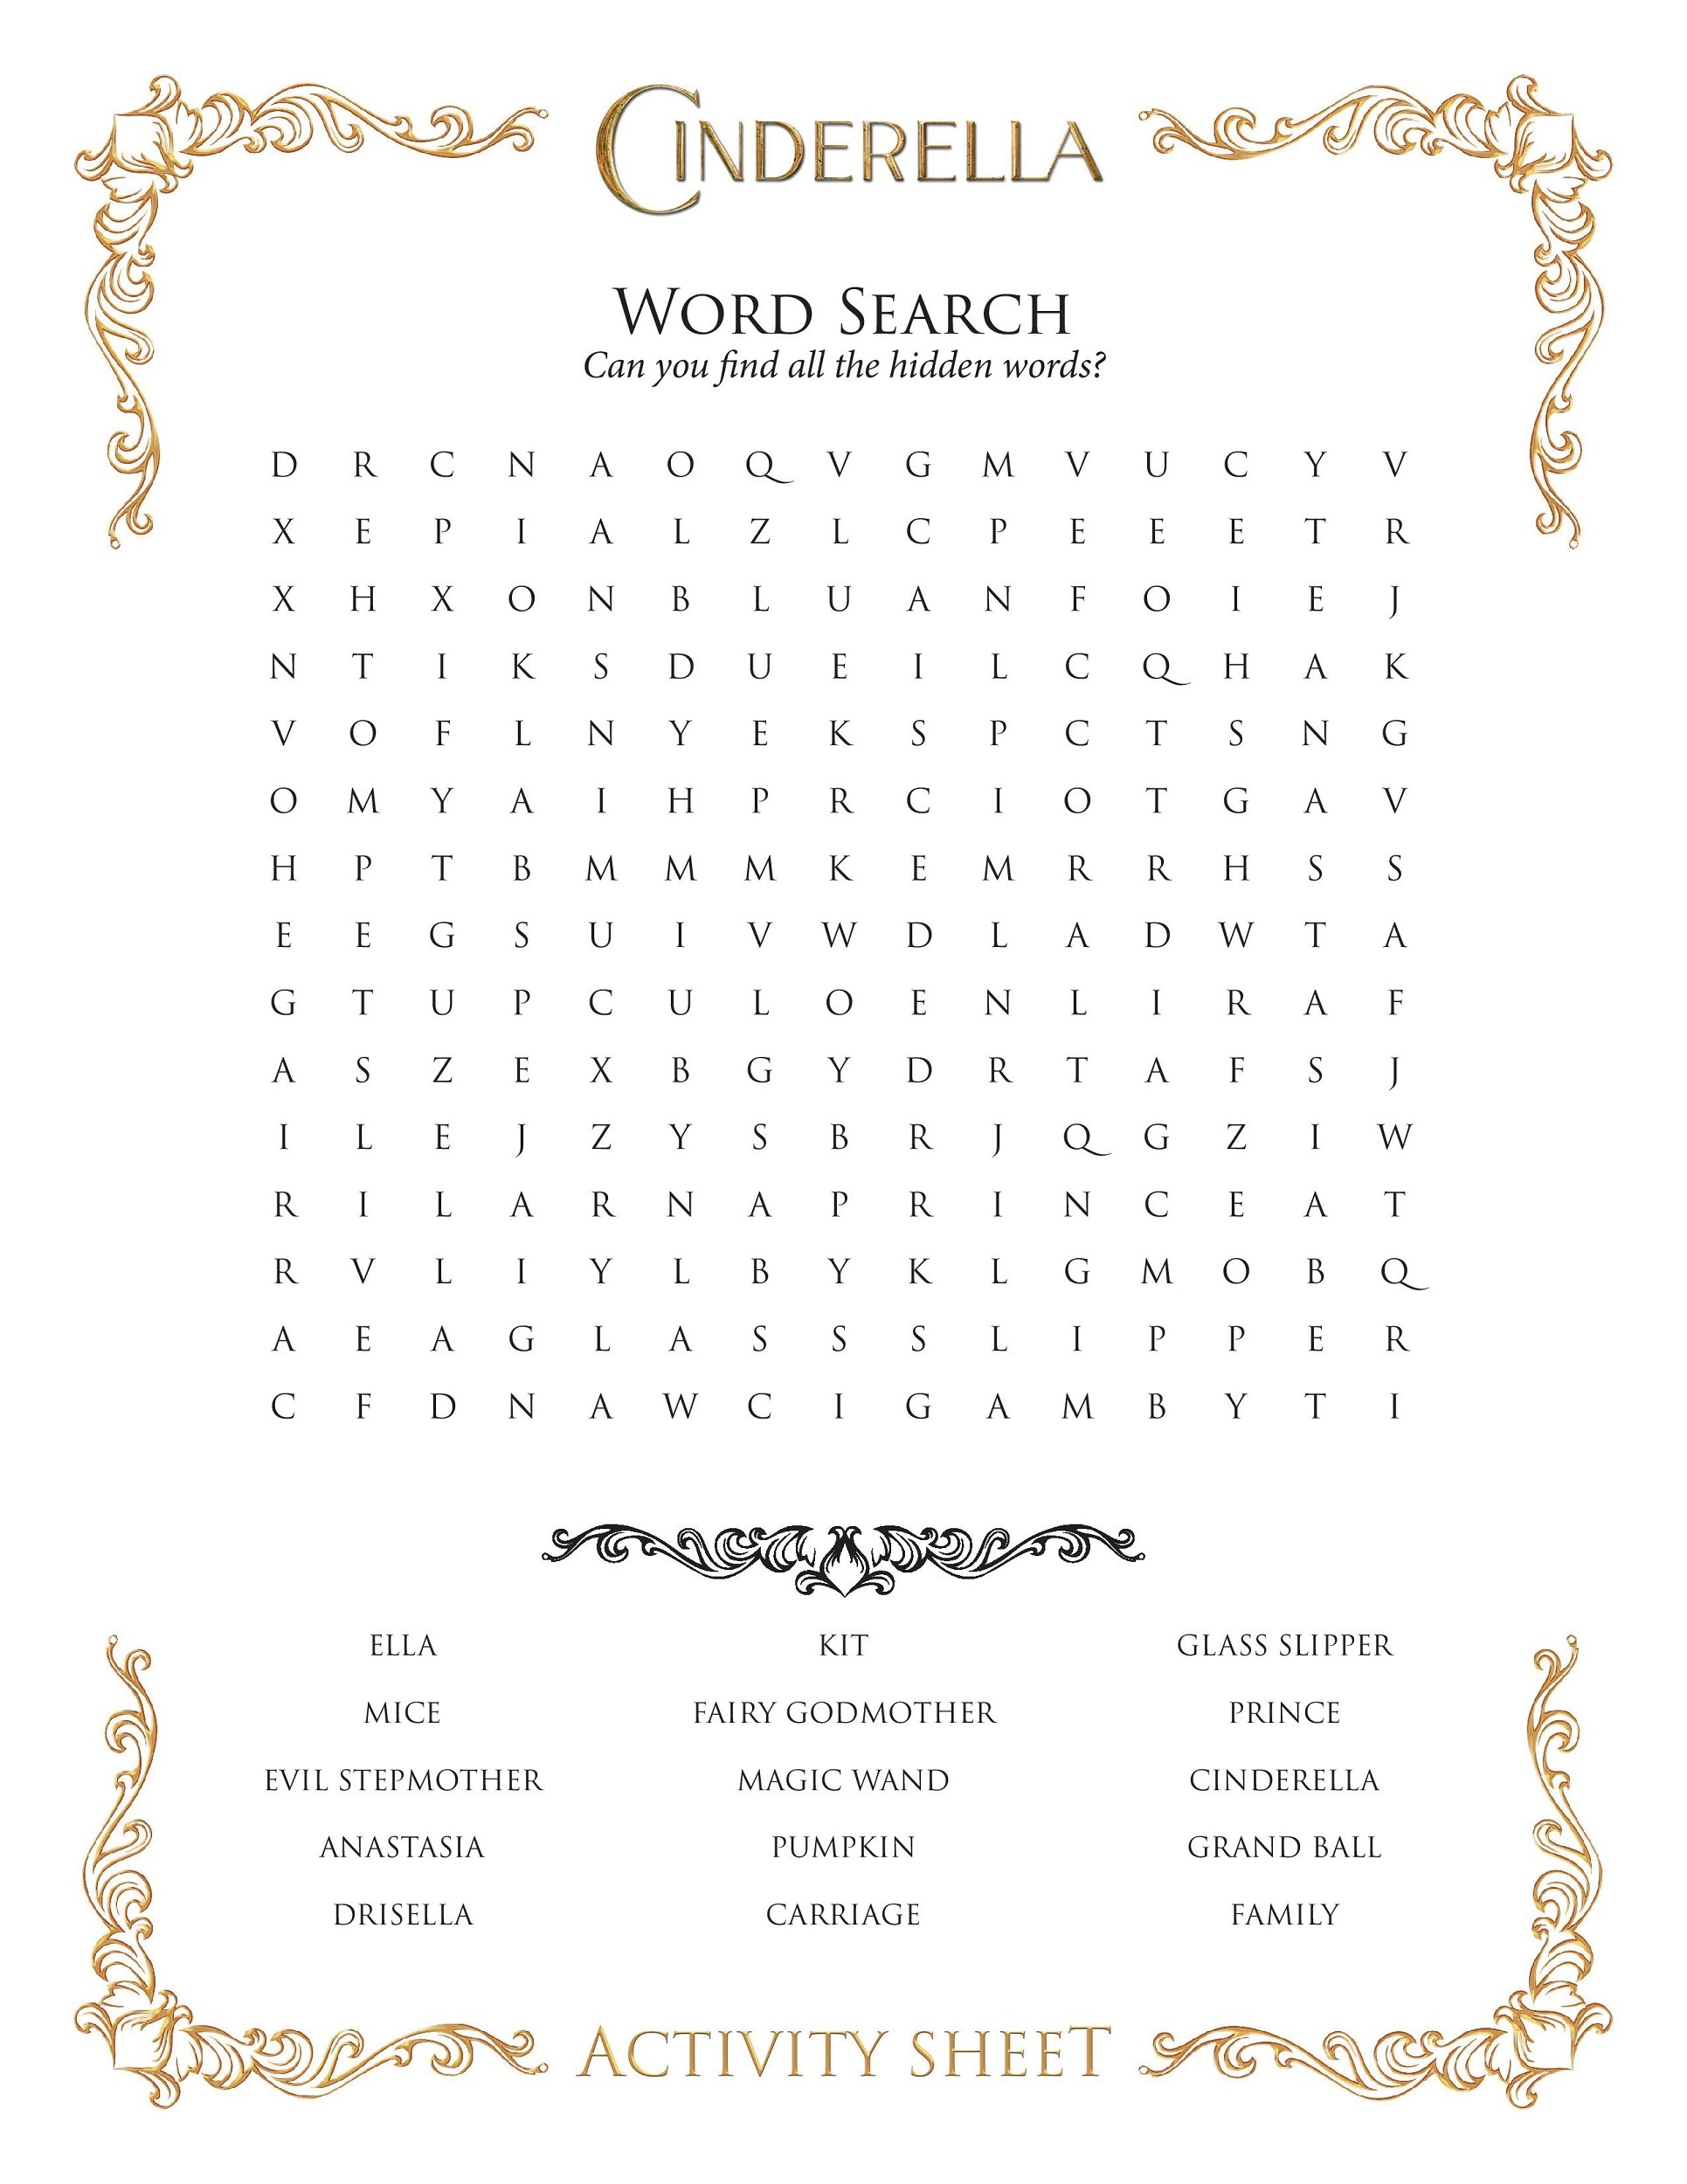 15 Free Disney Word Searches | Kittybabylove in Disney Word Search Printable